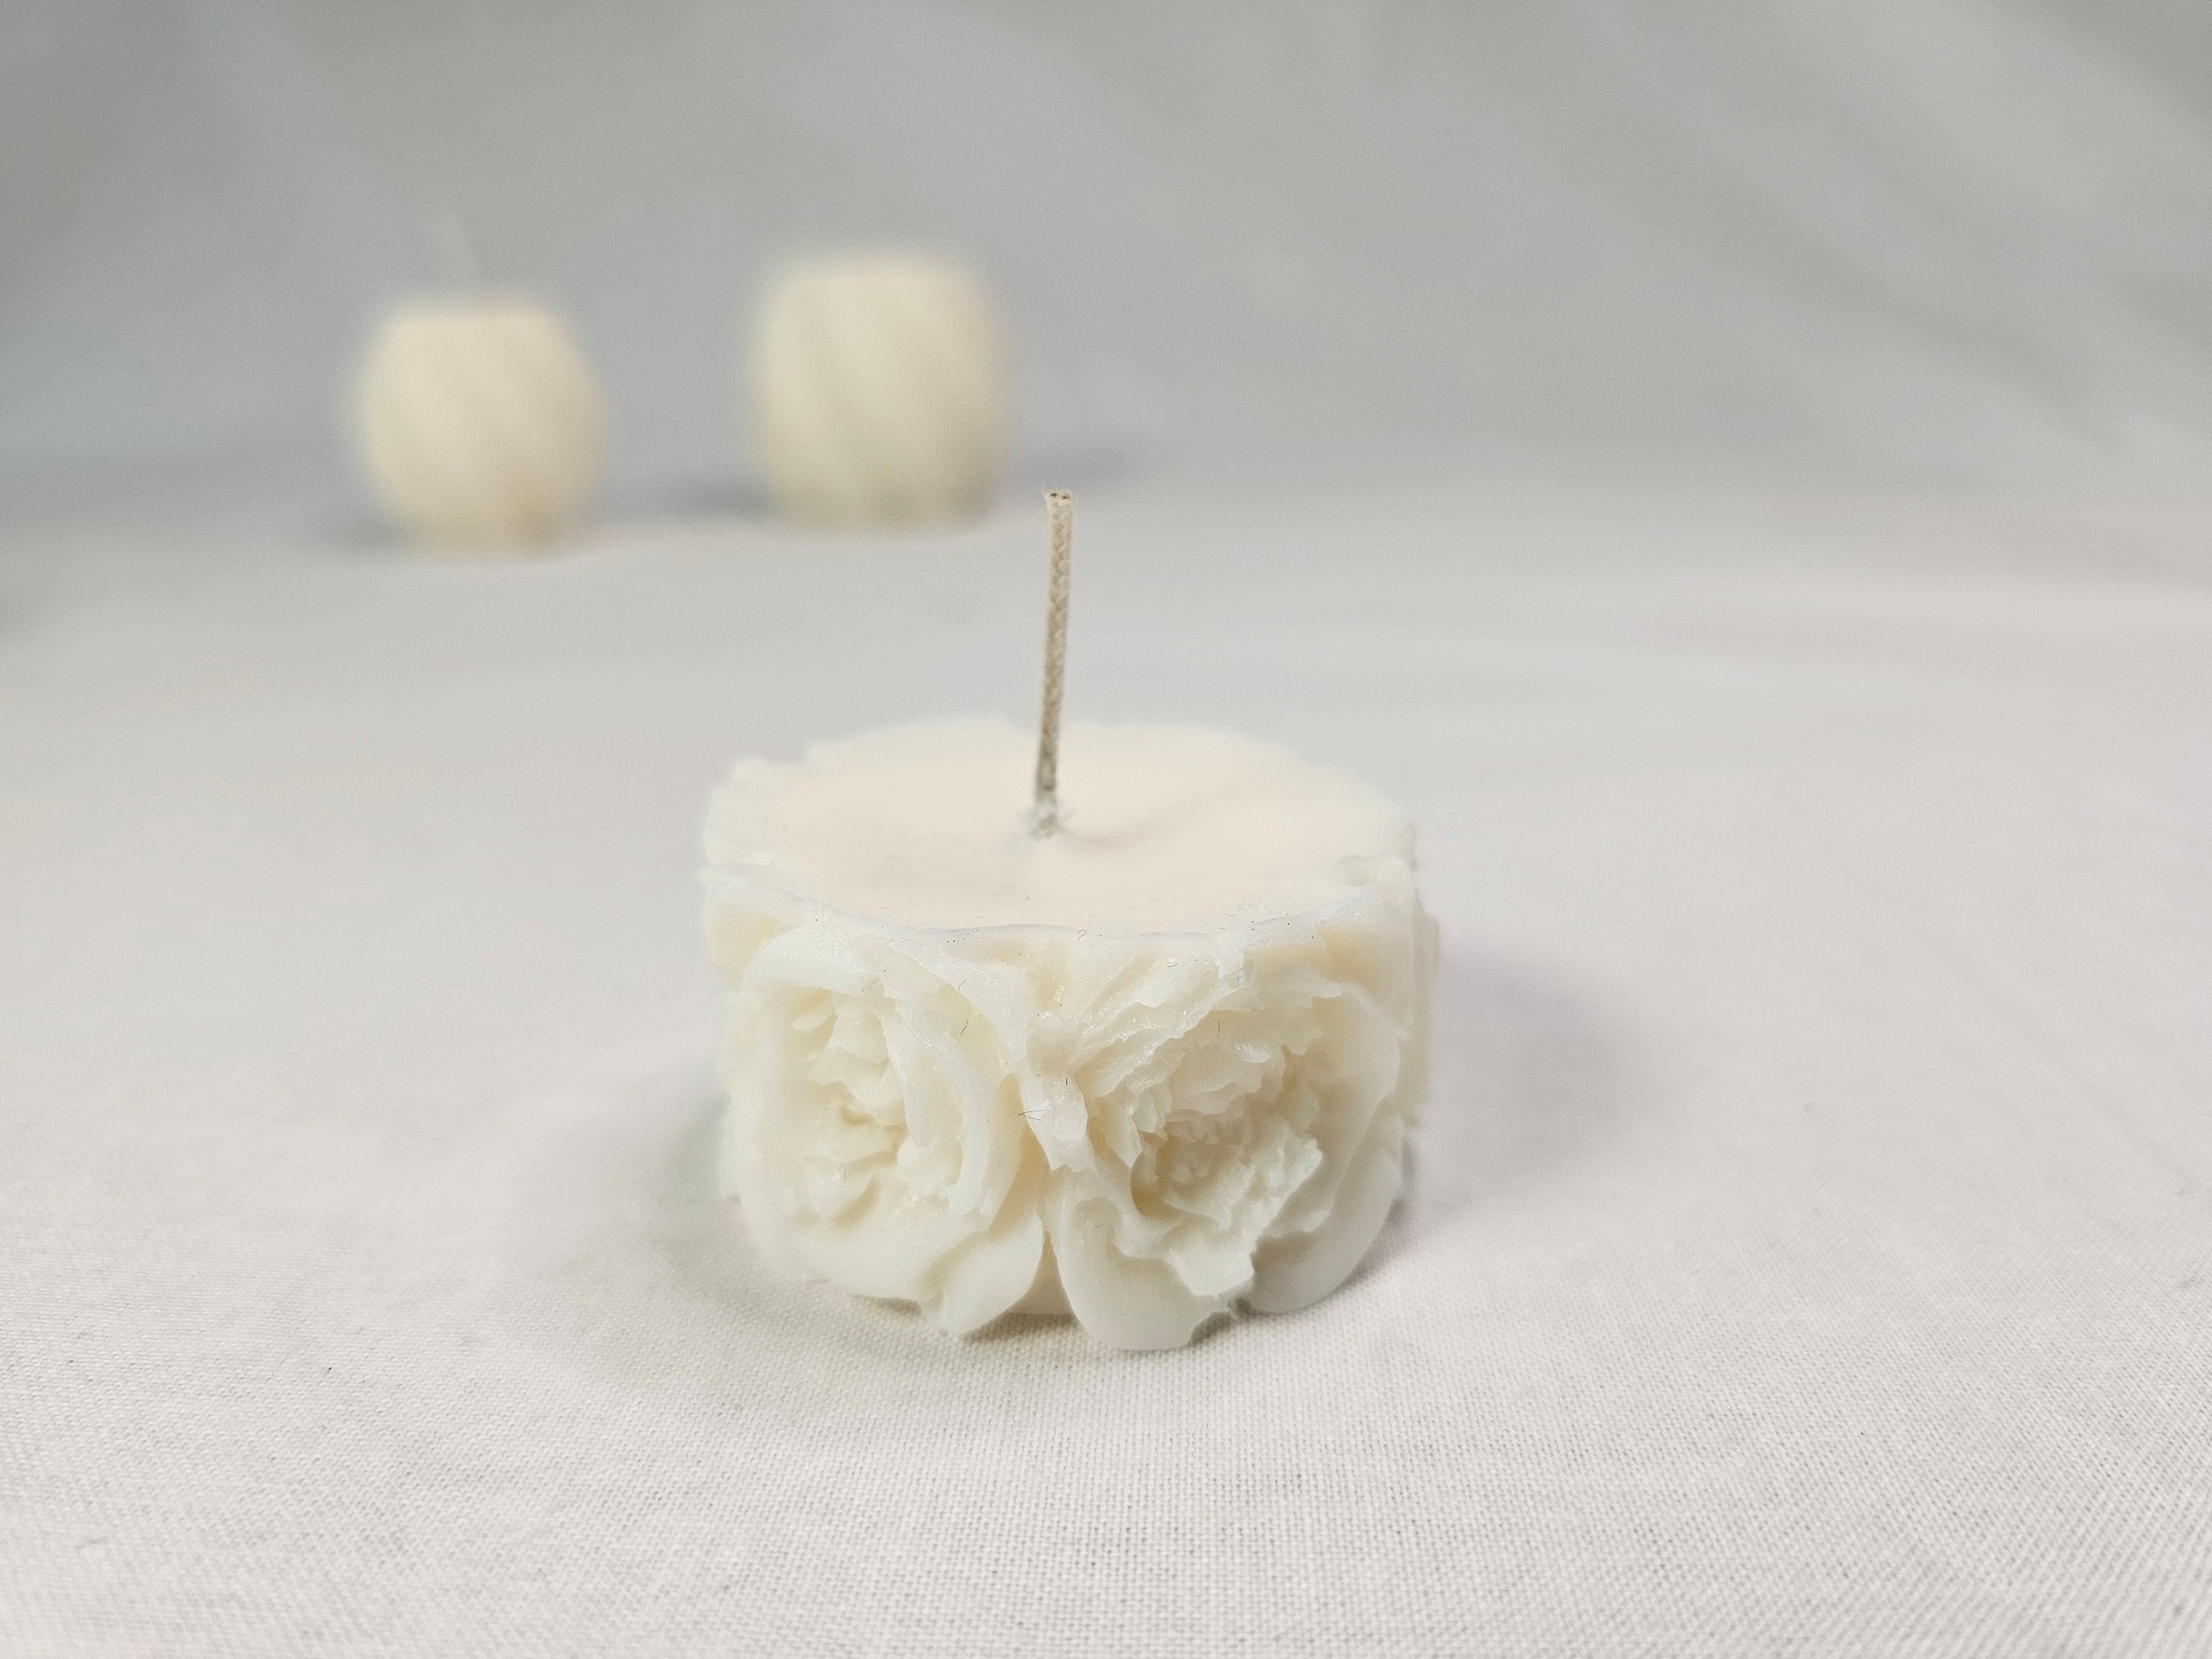 Rose bear Candle with Heart